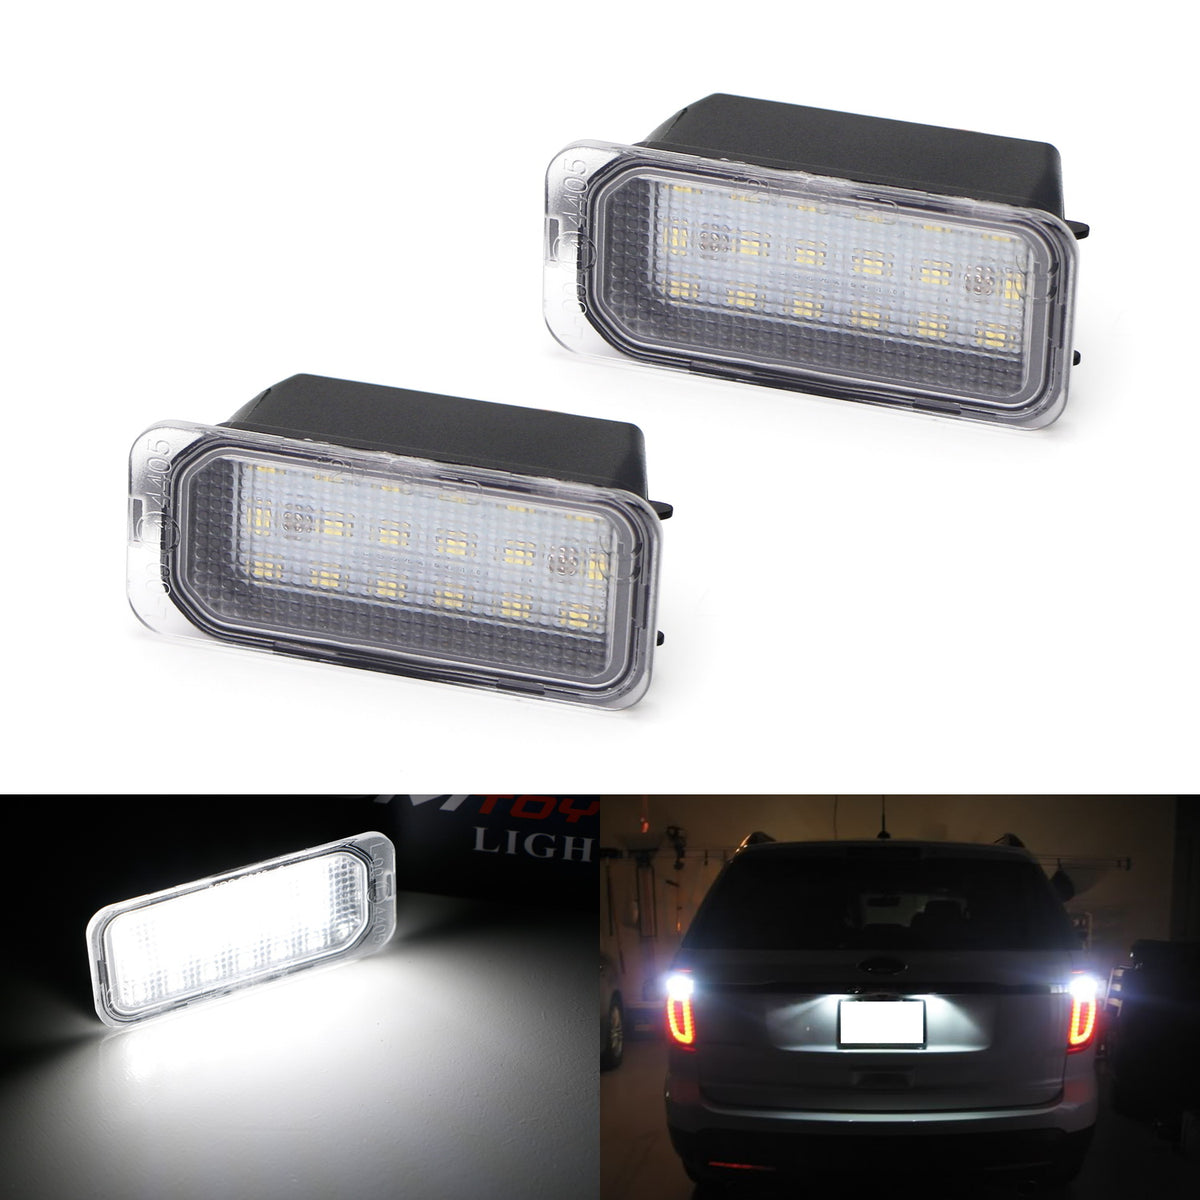 OEM-Replace 3-Diode White Osram LED License Plate Light Assy For Ford  Lincoln